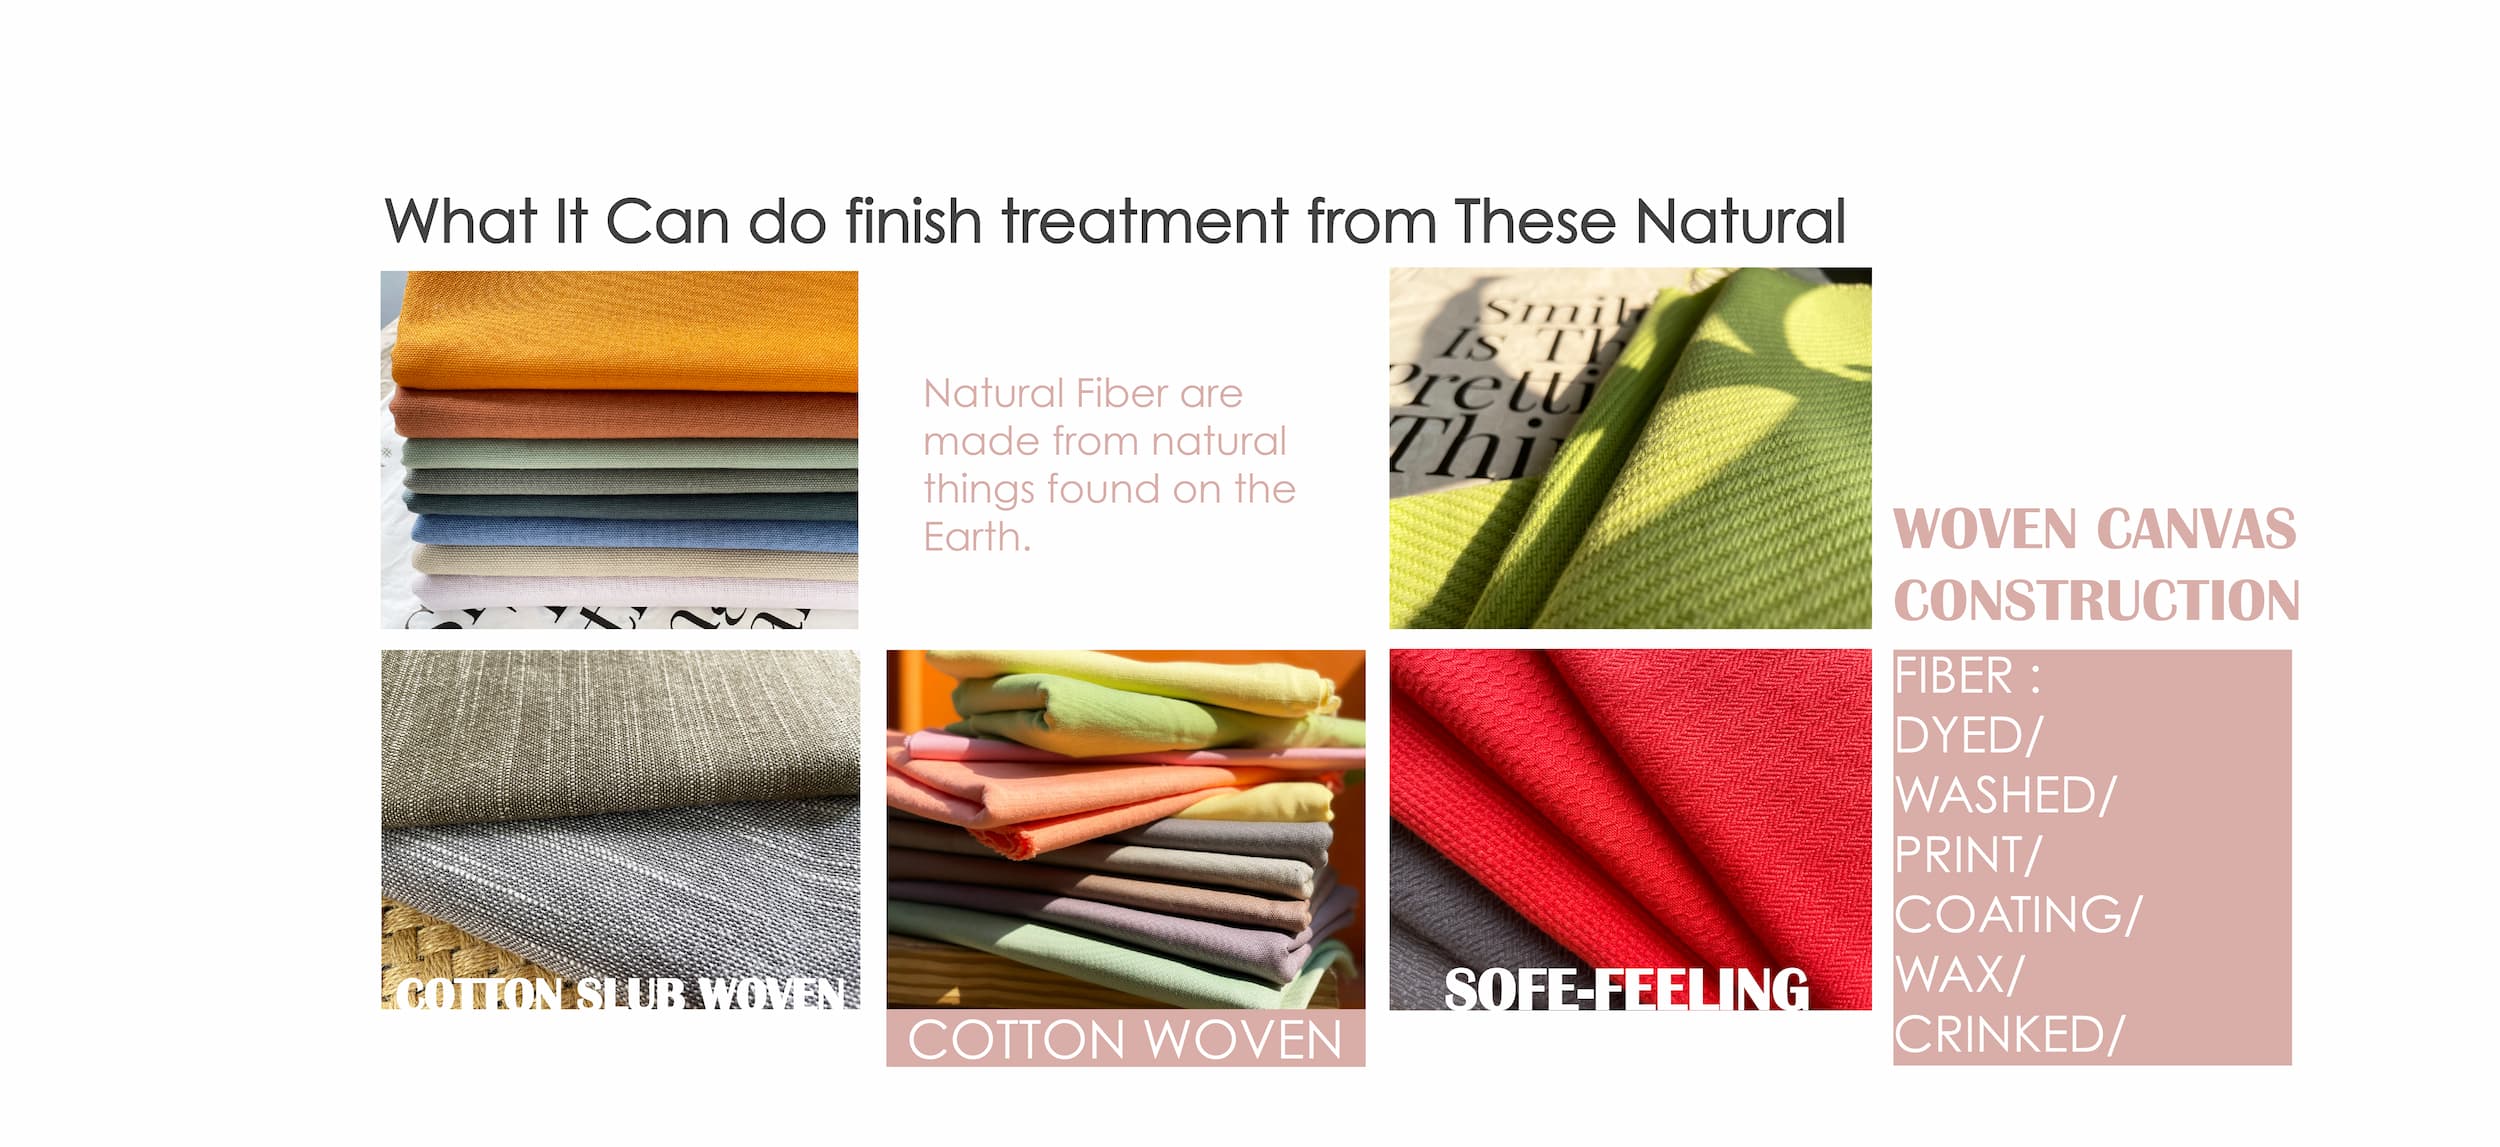 What It Can do finish treatment from These Natural